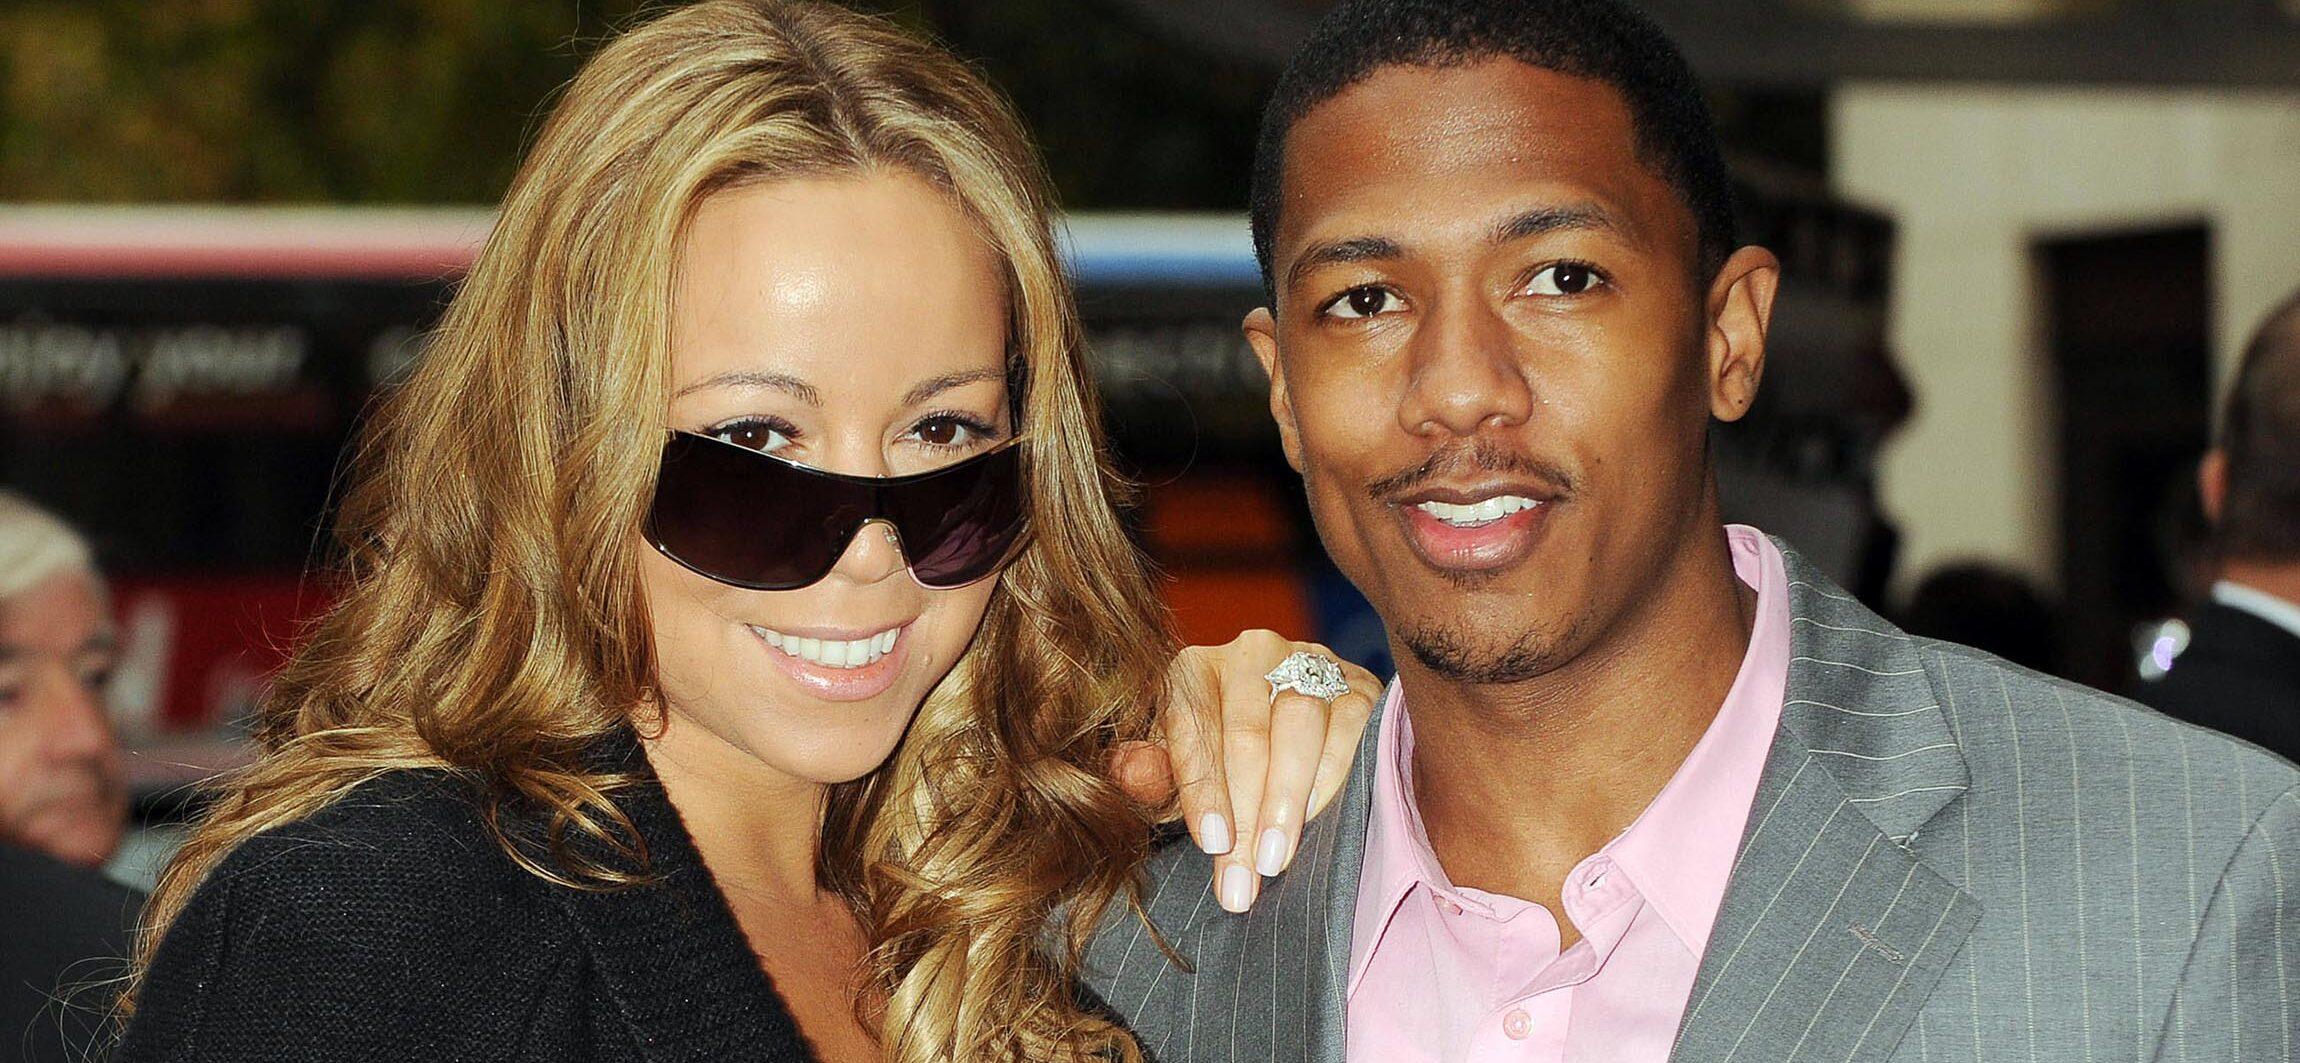 Nick Cannon Recalls Childhood Crush On Ex-Wife Mariah Carey, Says She’s A ‘Gift From God’